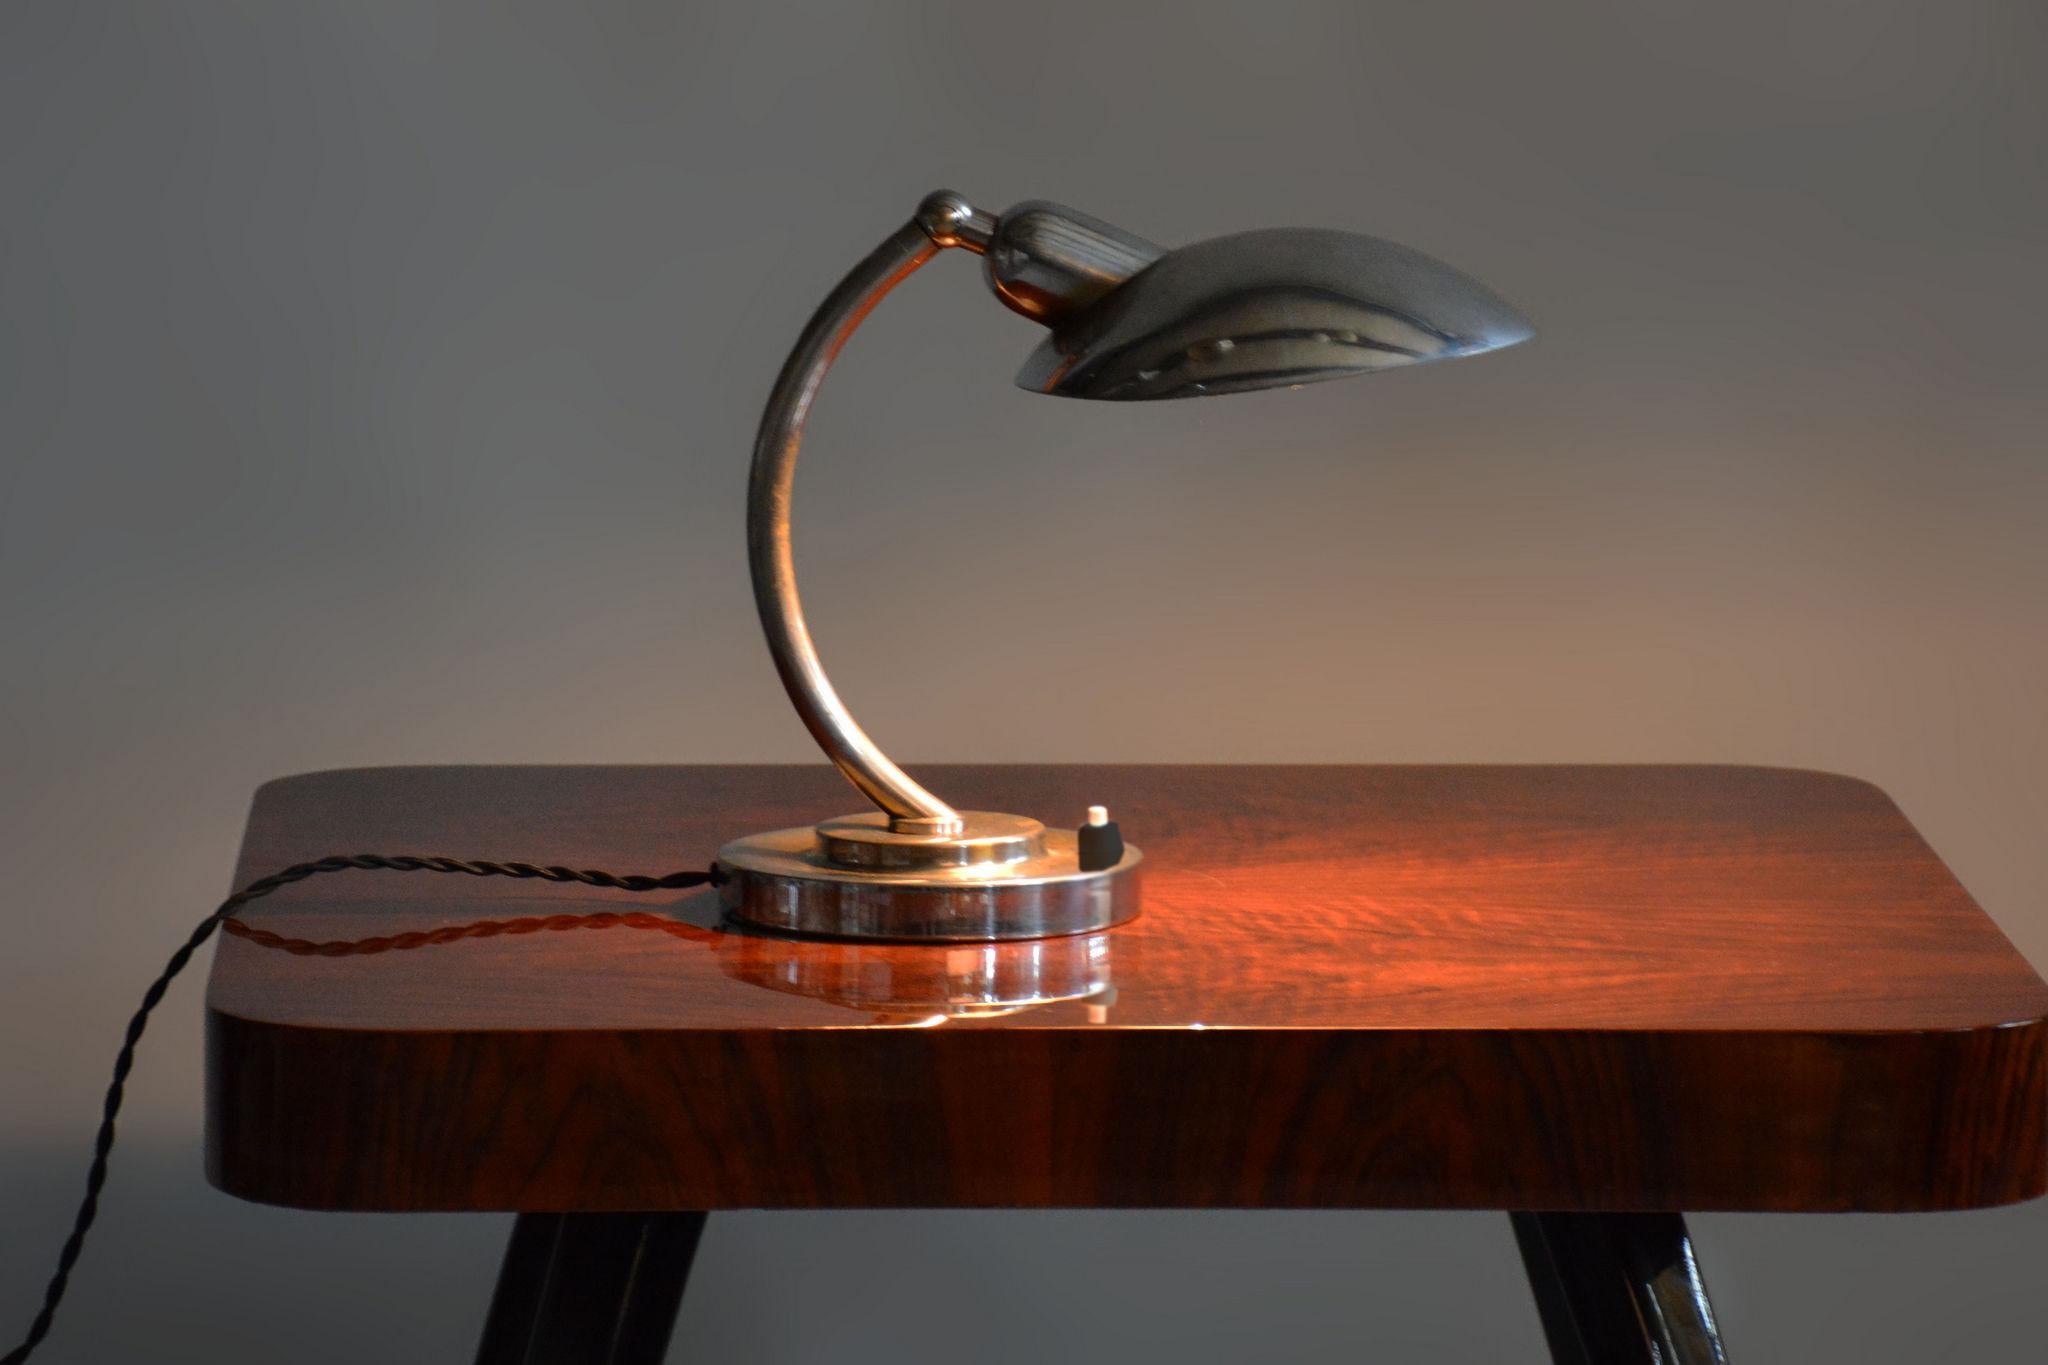 Restored Bauhaus Chrome Table Lamp, F. Anyz, New Electrification, Czechia, 1920s For Sale 5